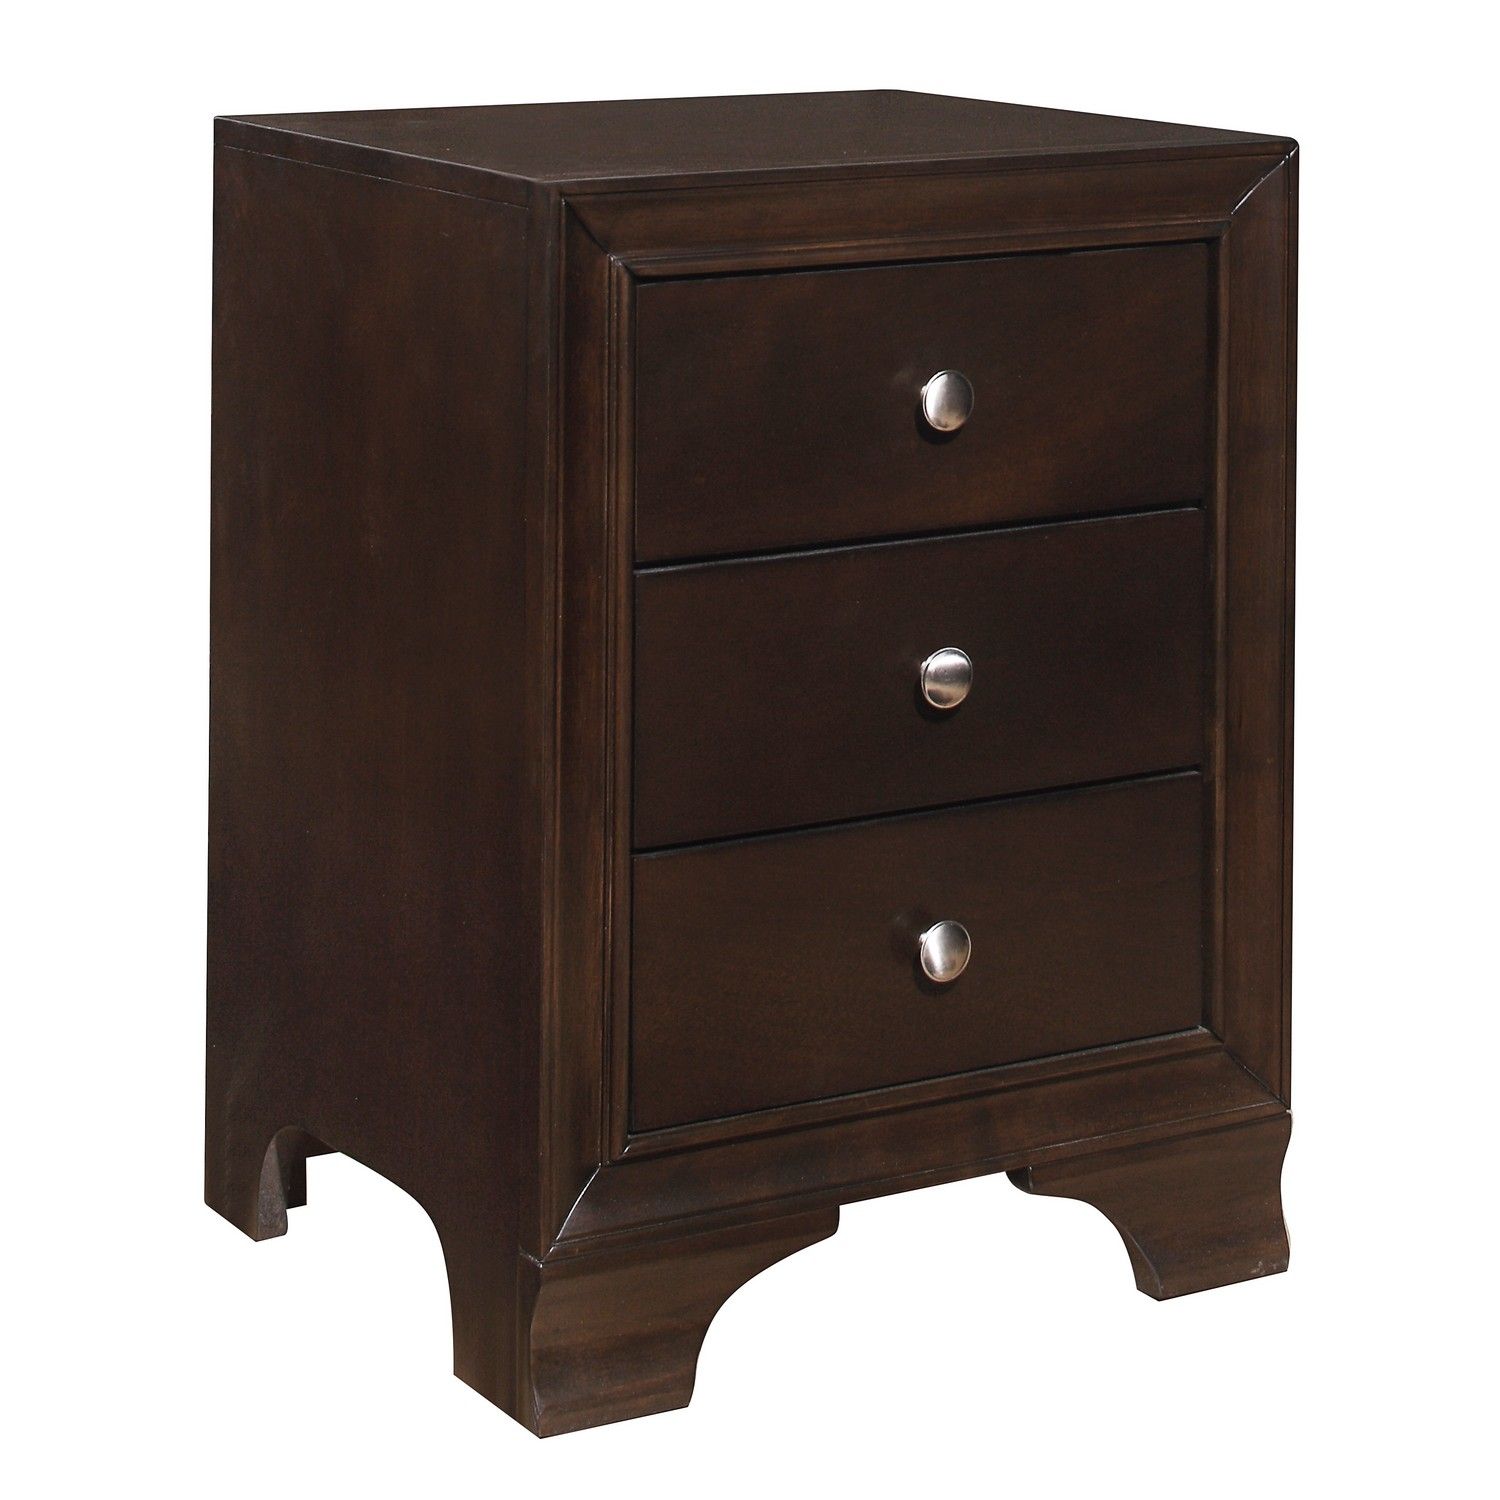 Homelegance Centralia Night Stand - Brown